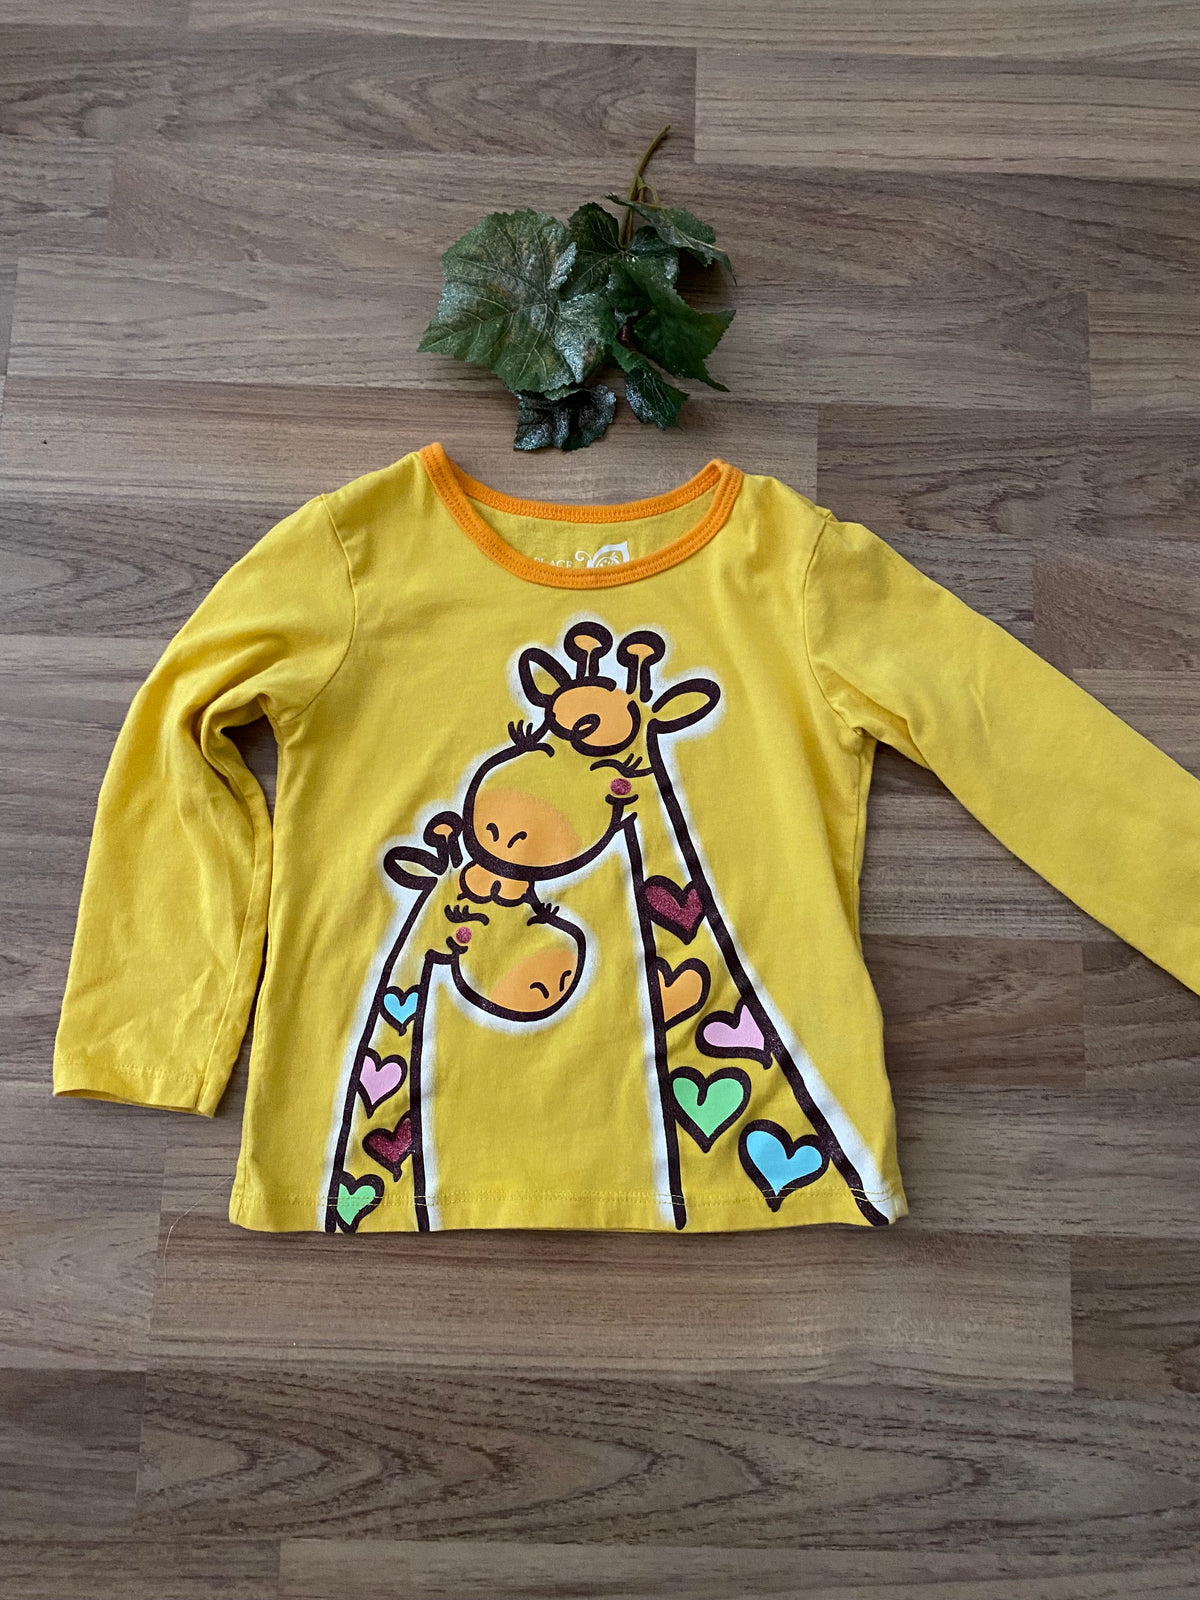 Long Sleeve Graphic Top (Girls Size 3)